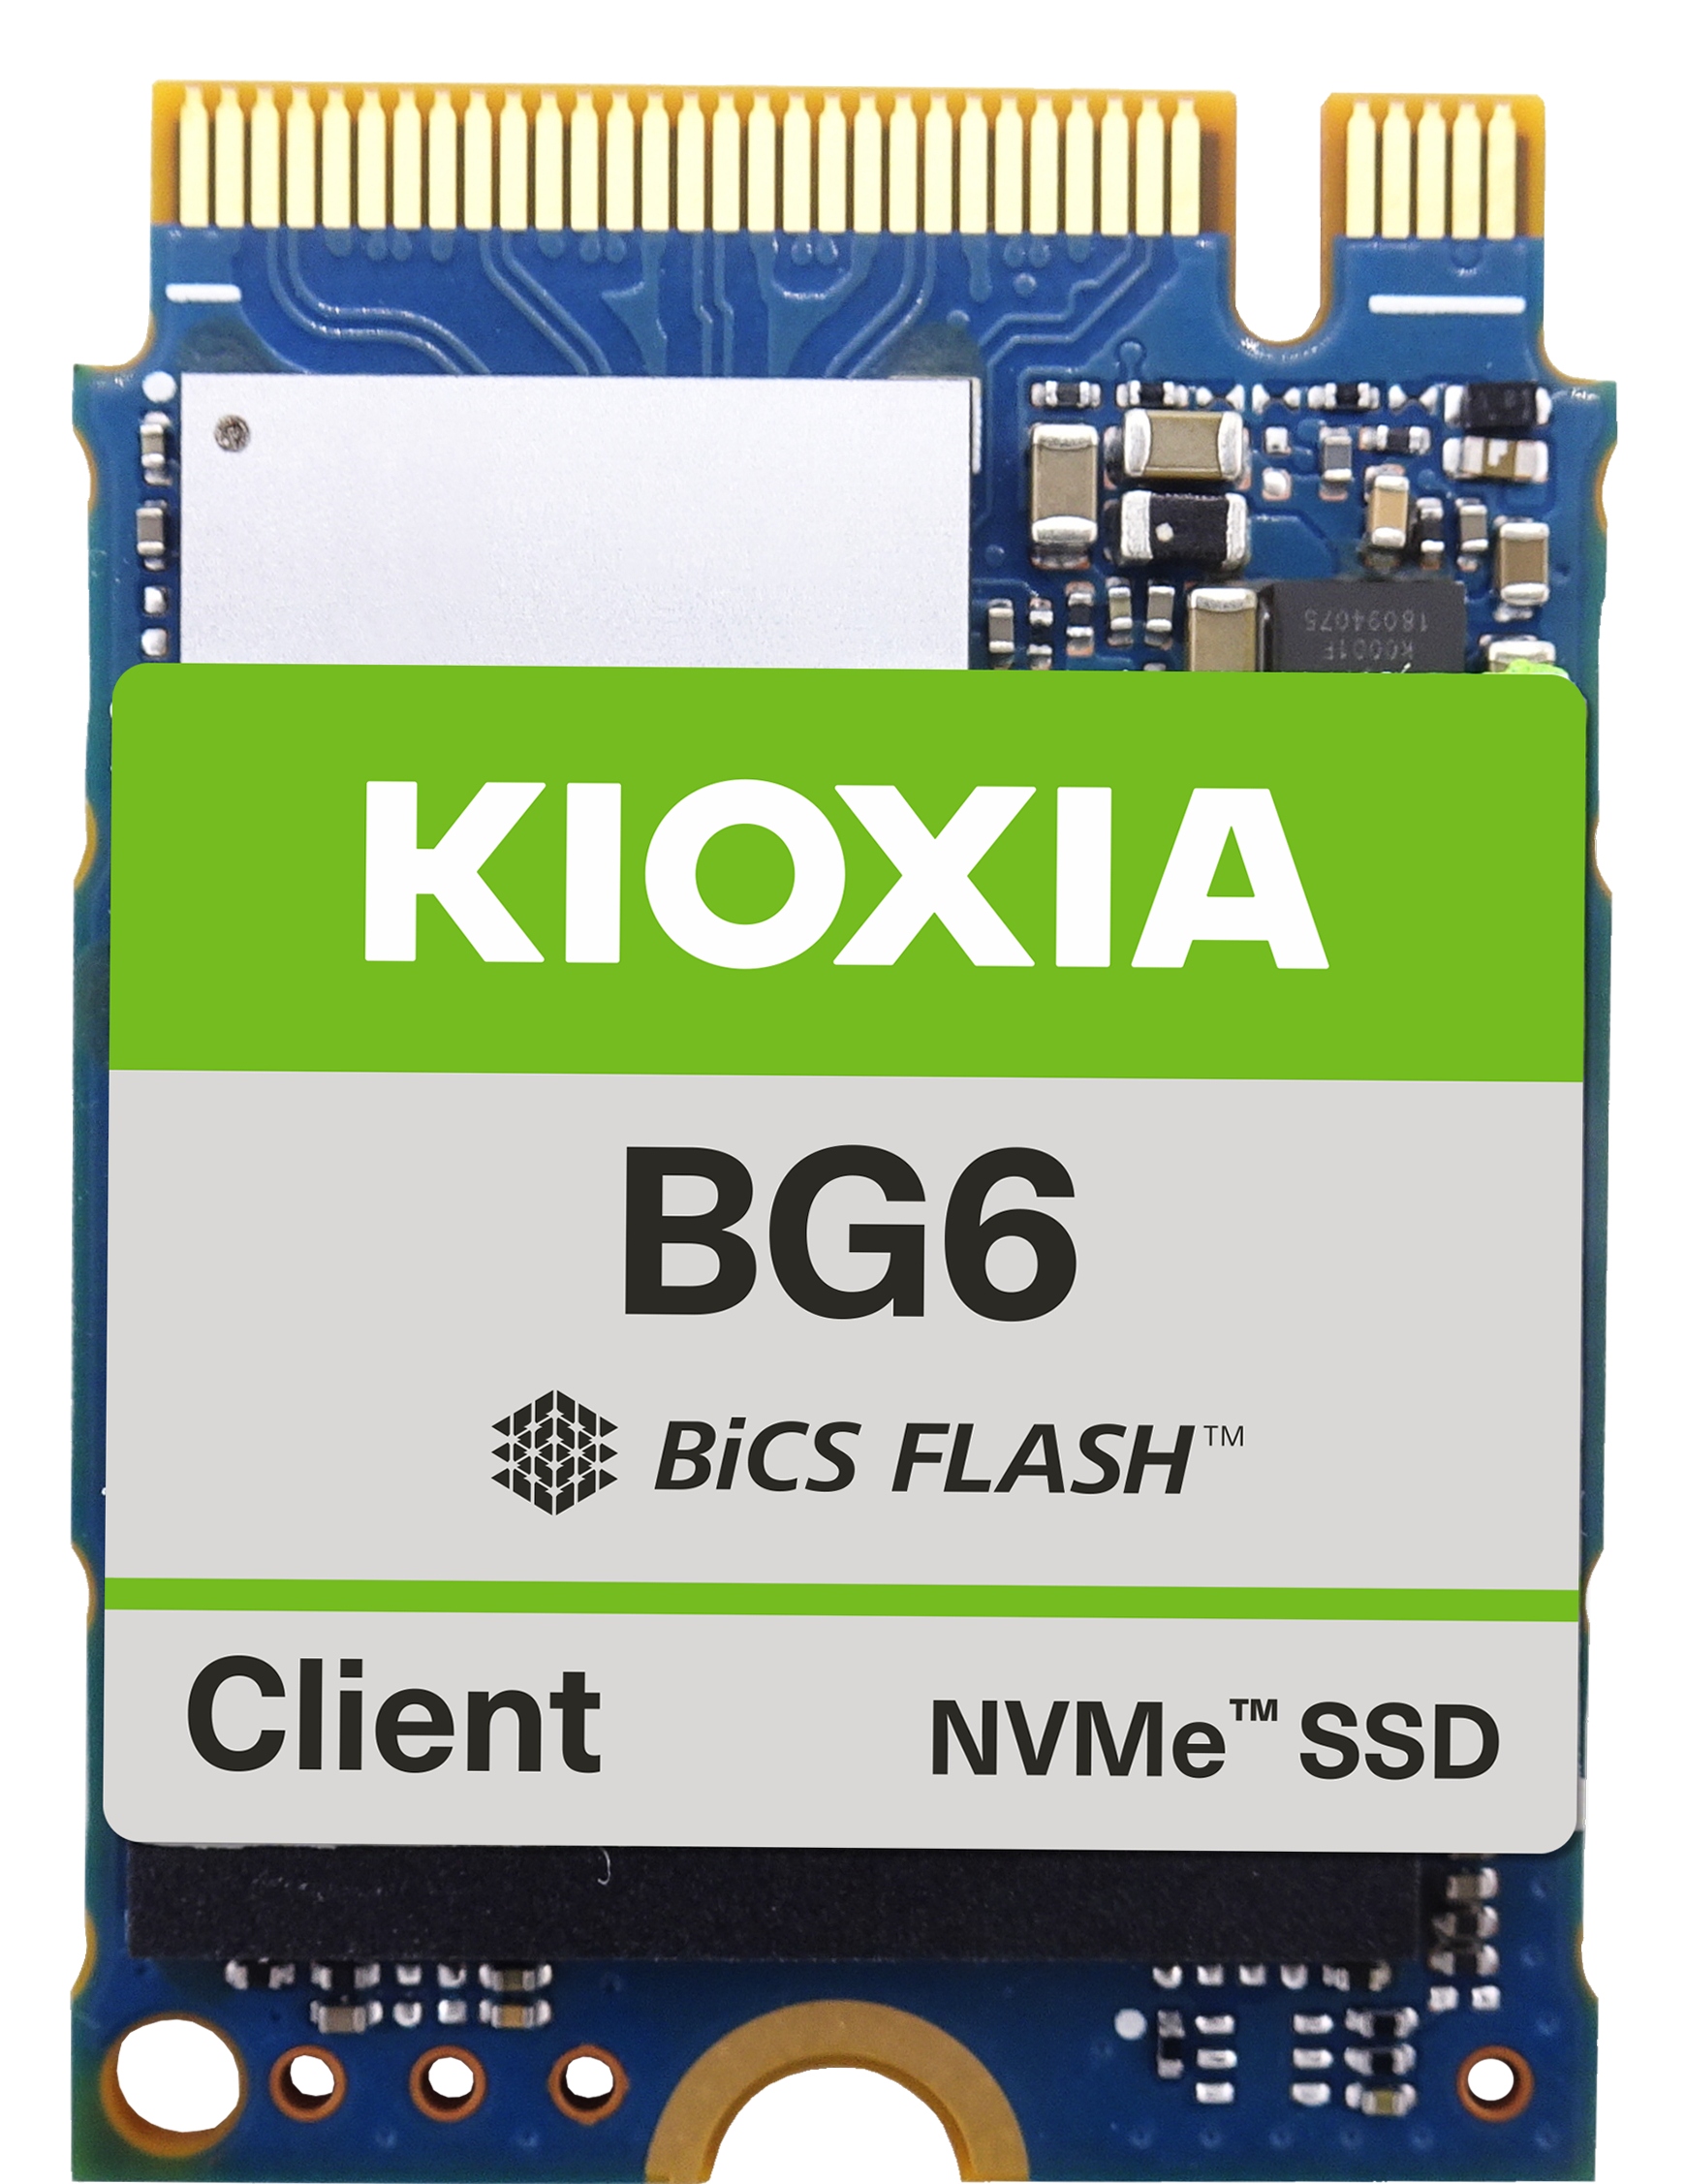 KIOXIA Introduces New BG6 Series SSDs, Brings PCIe 4.0 and Affordability to the Mainstream Business